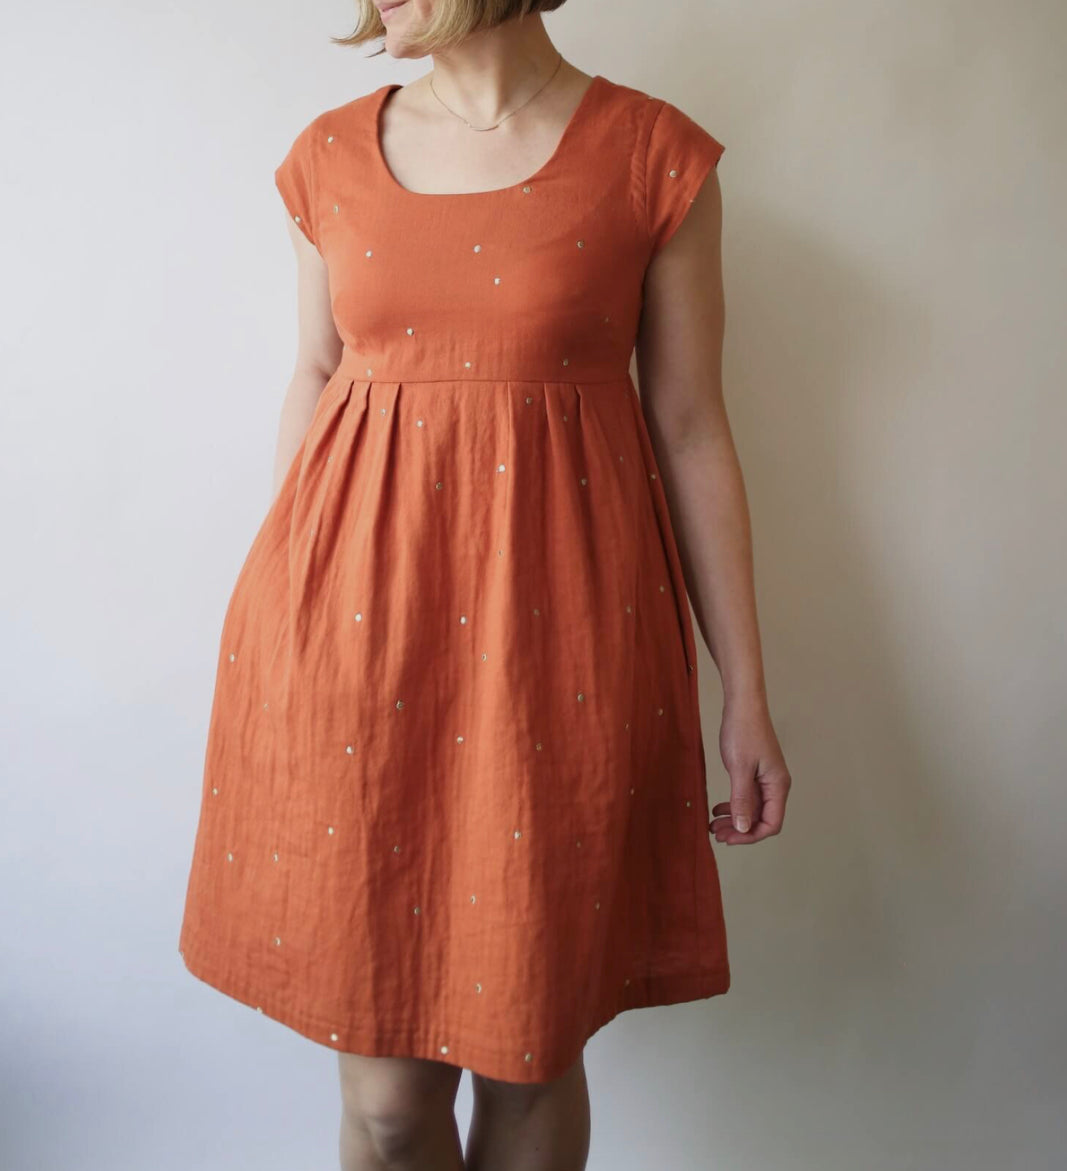 Made By Rae - Trillium Dress and Top Sewing Pattern